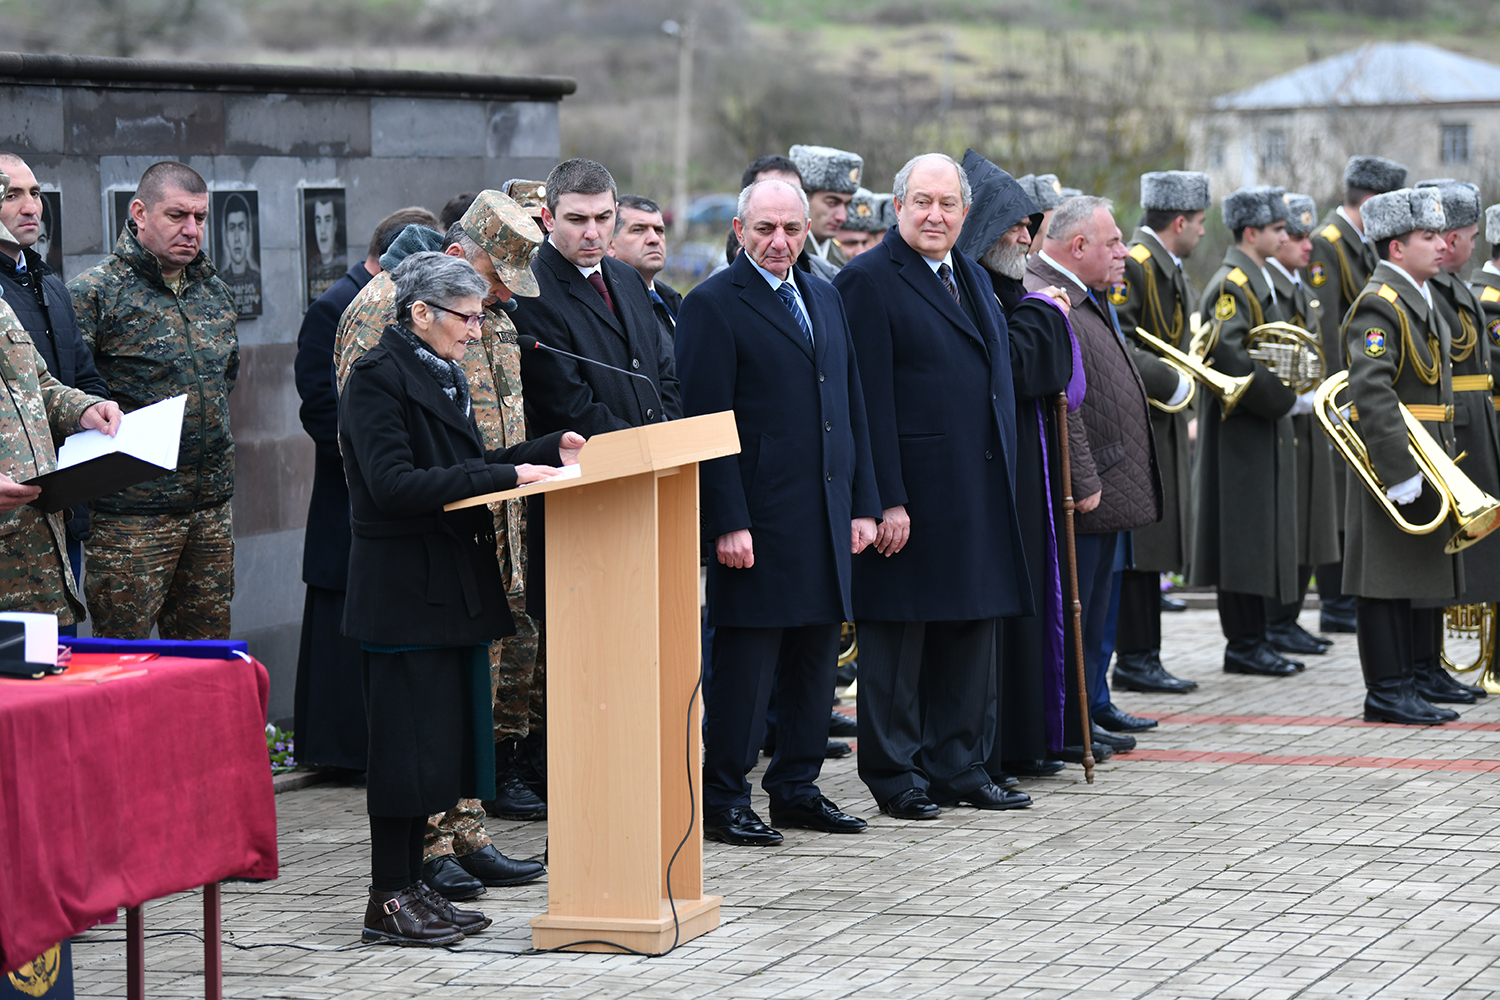 Presidents of Armenia and Artsakh participated at the unveiling of the monument dedicated to Maghavouz village residents who fell in the Artsakh War